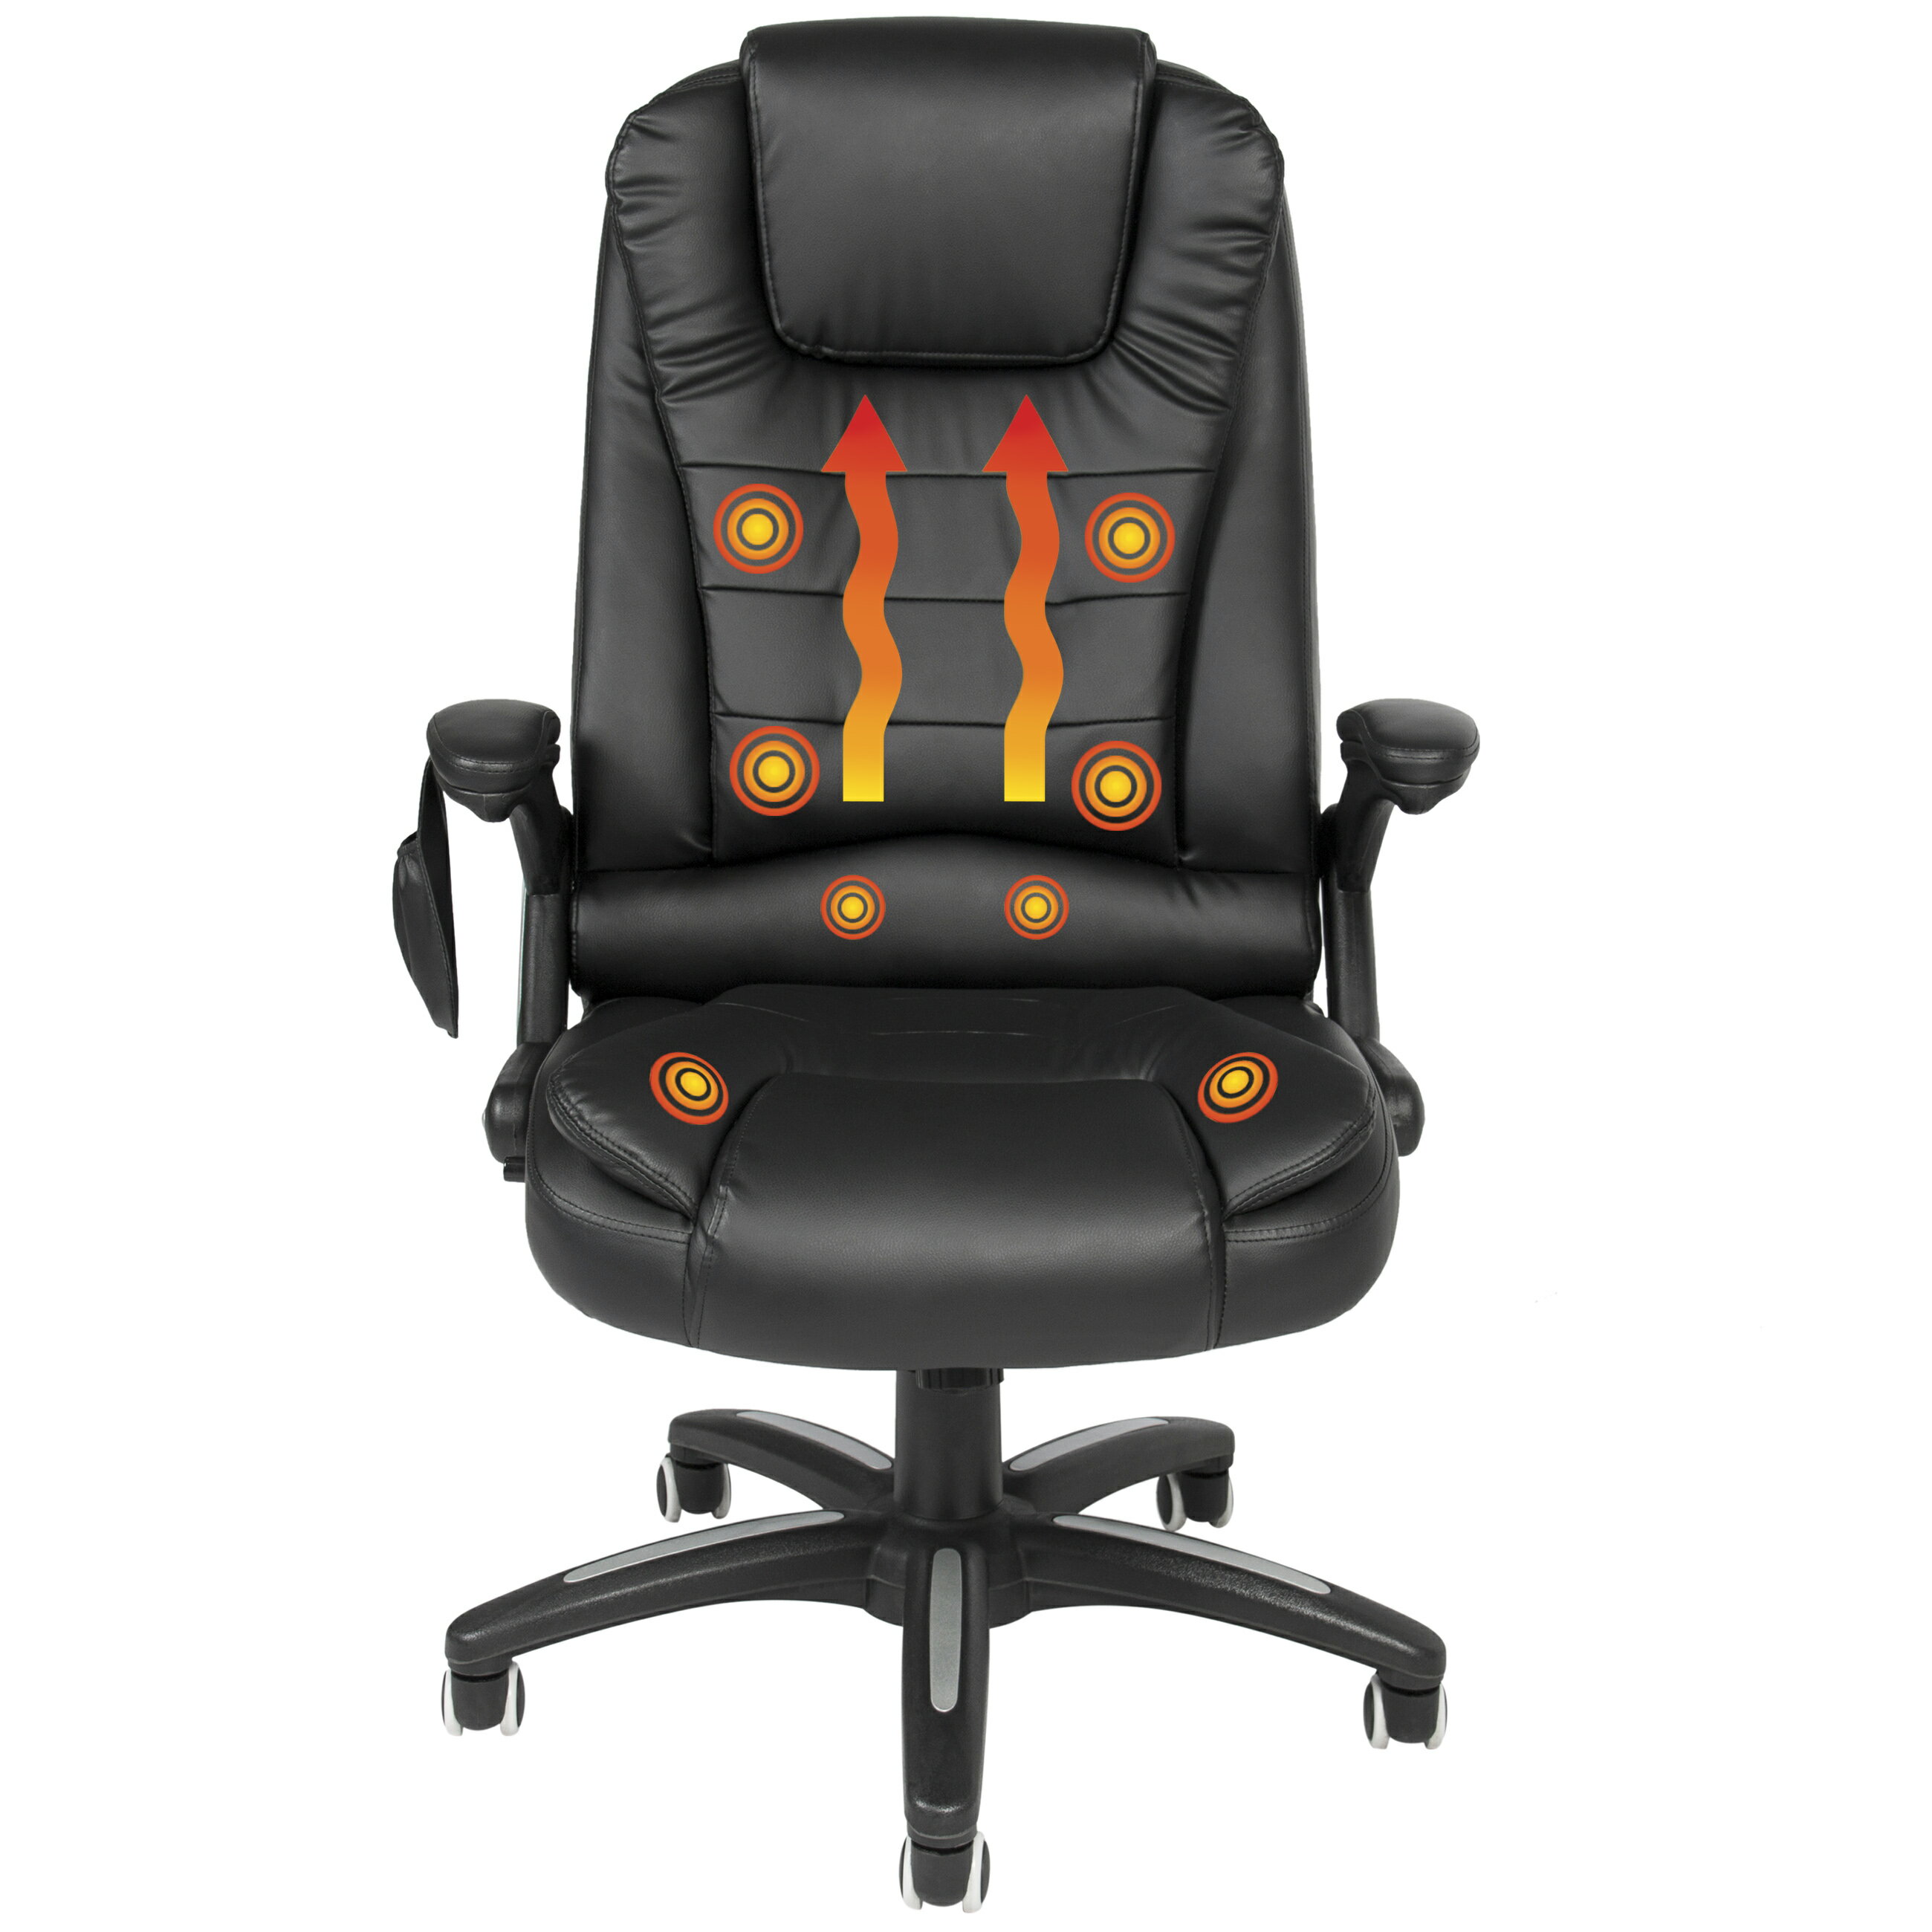 BestChoiceProducts: Best Choice Products Executive Ergonomic Heated